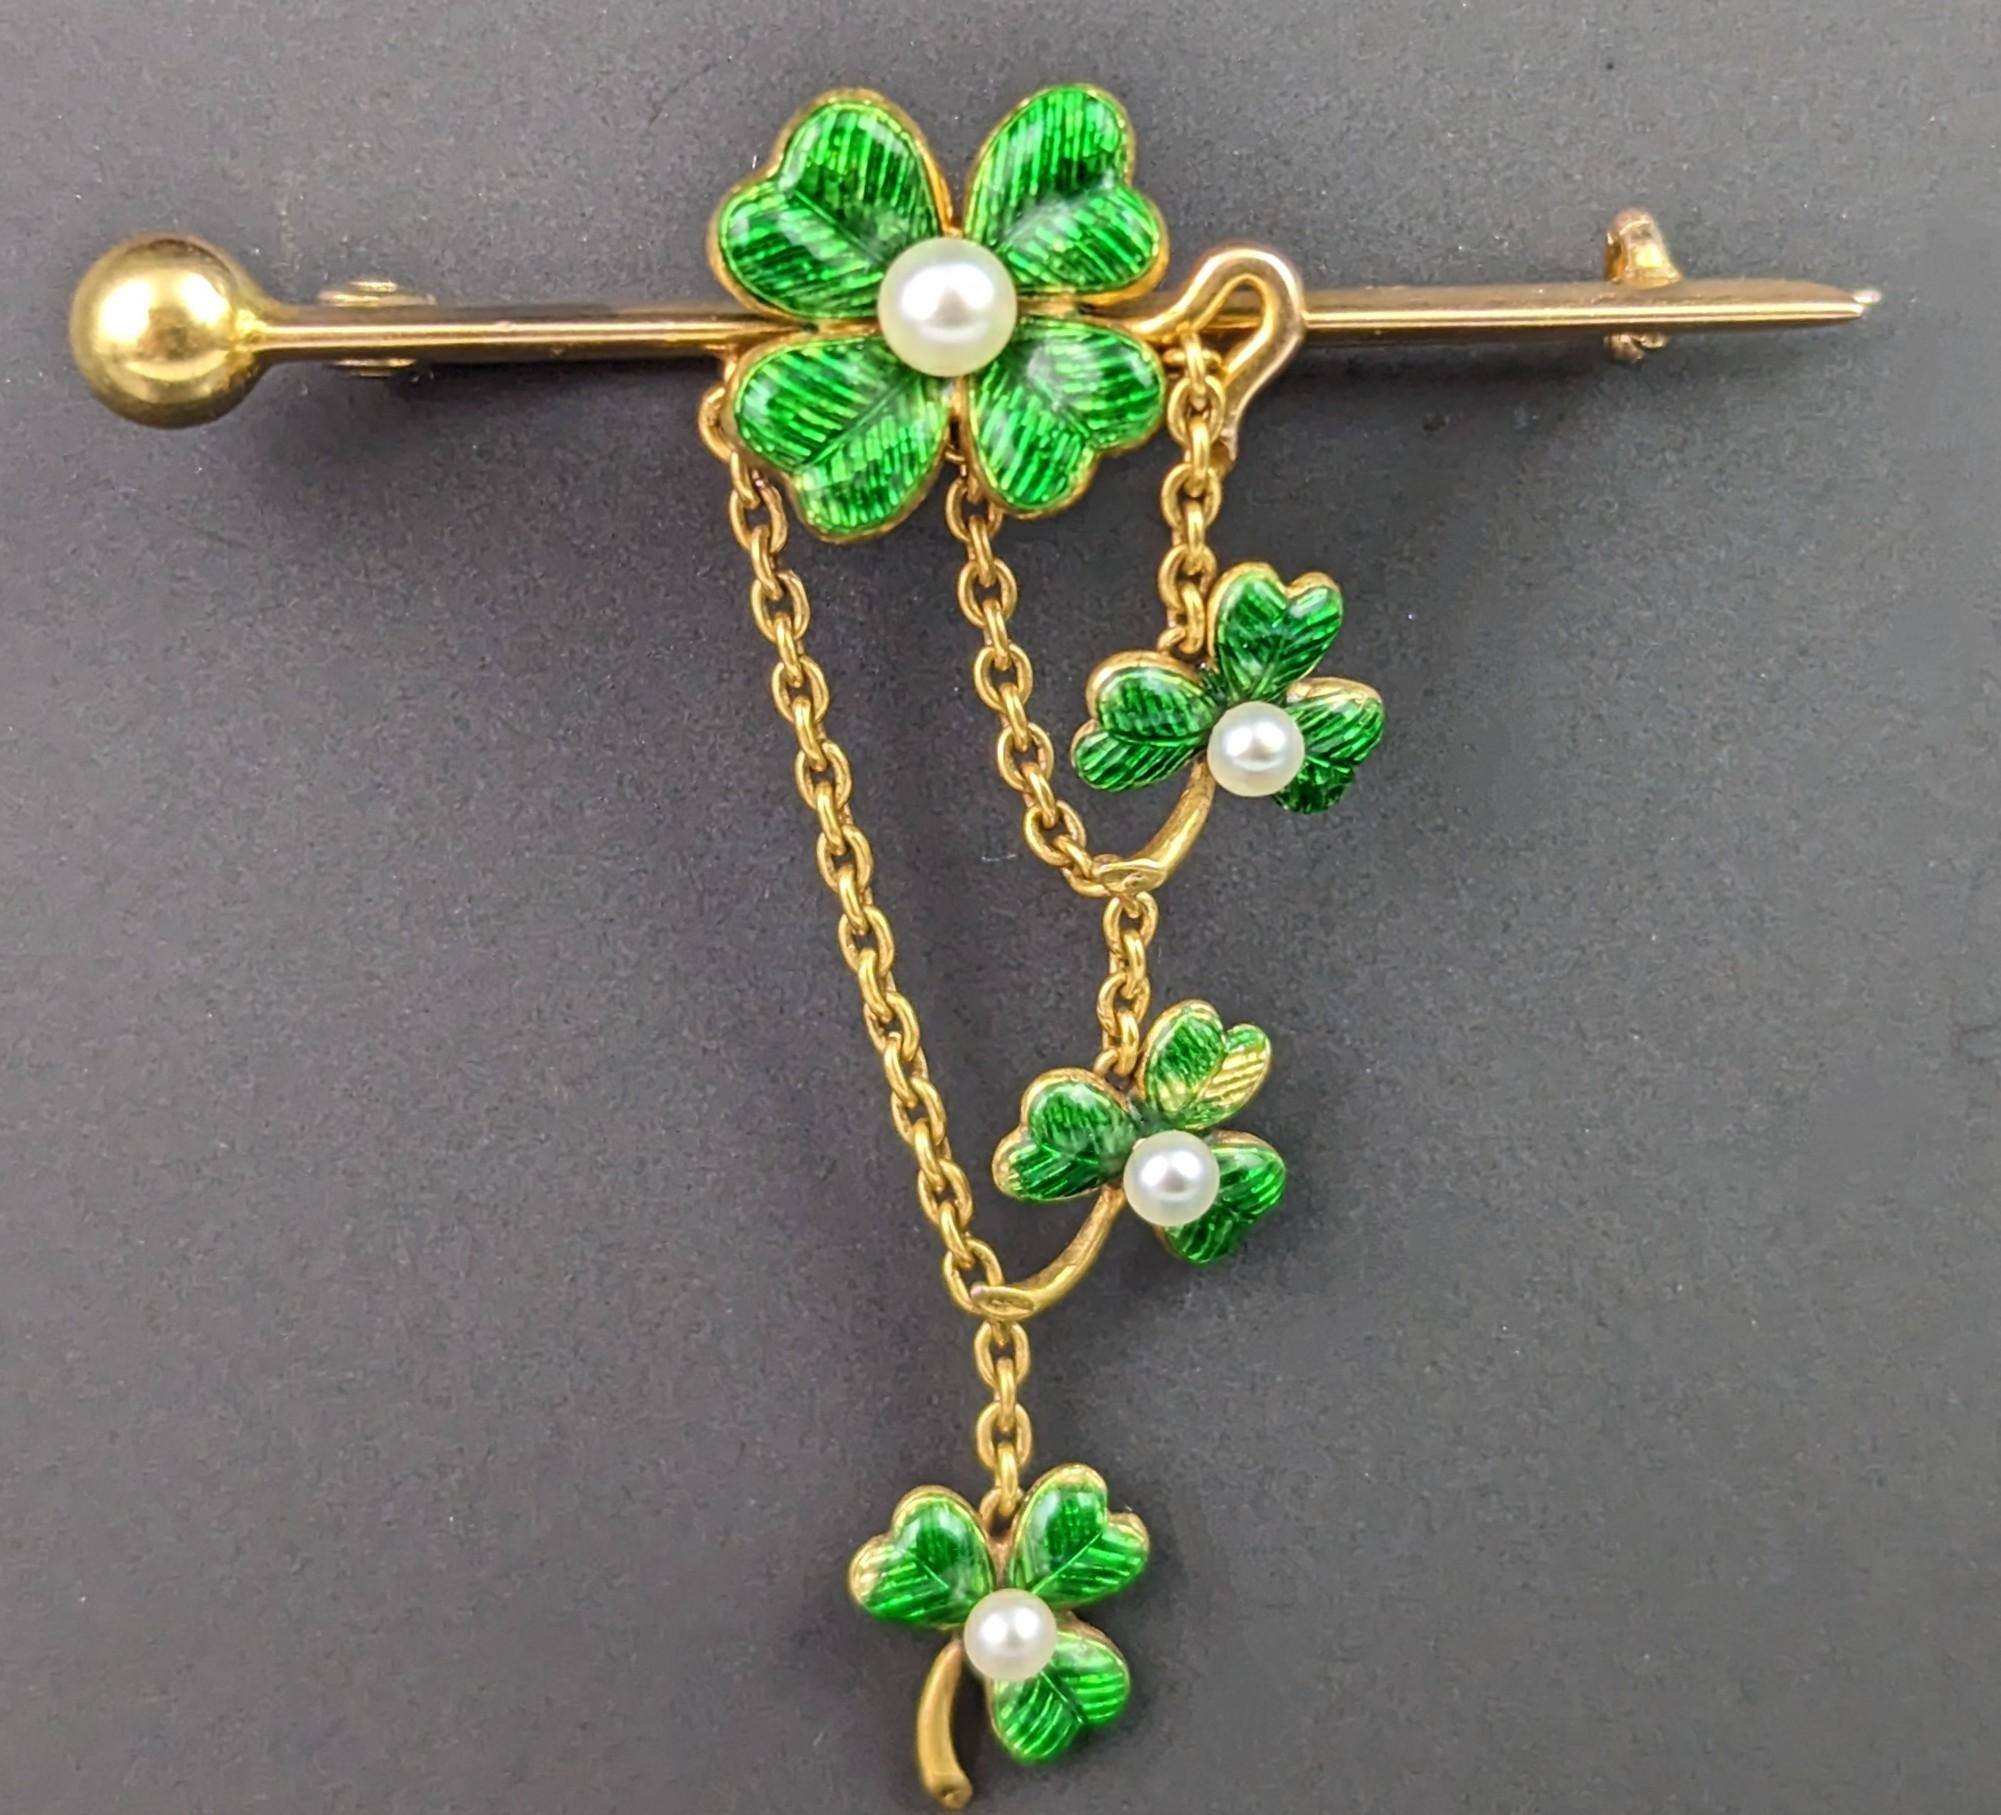 Wow this antique 15kt gold, guilloche enamel and seed pearl brooch is really something special, don't you agree?

This pretty piece has so much going for it, the rich old 15lt gold glow, vibrant and detailed green guilloche enamel and a lovely